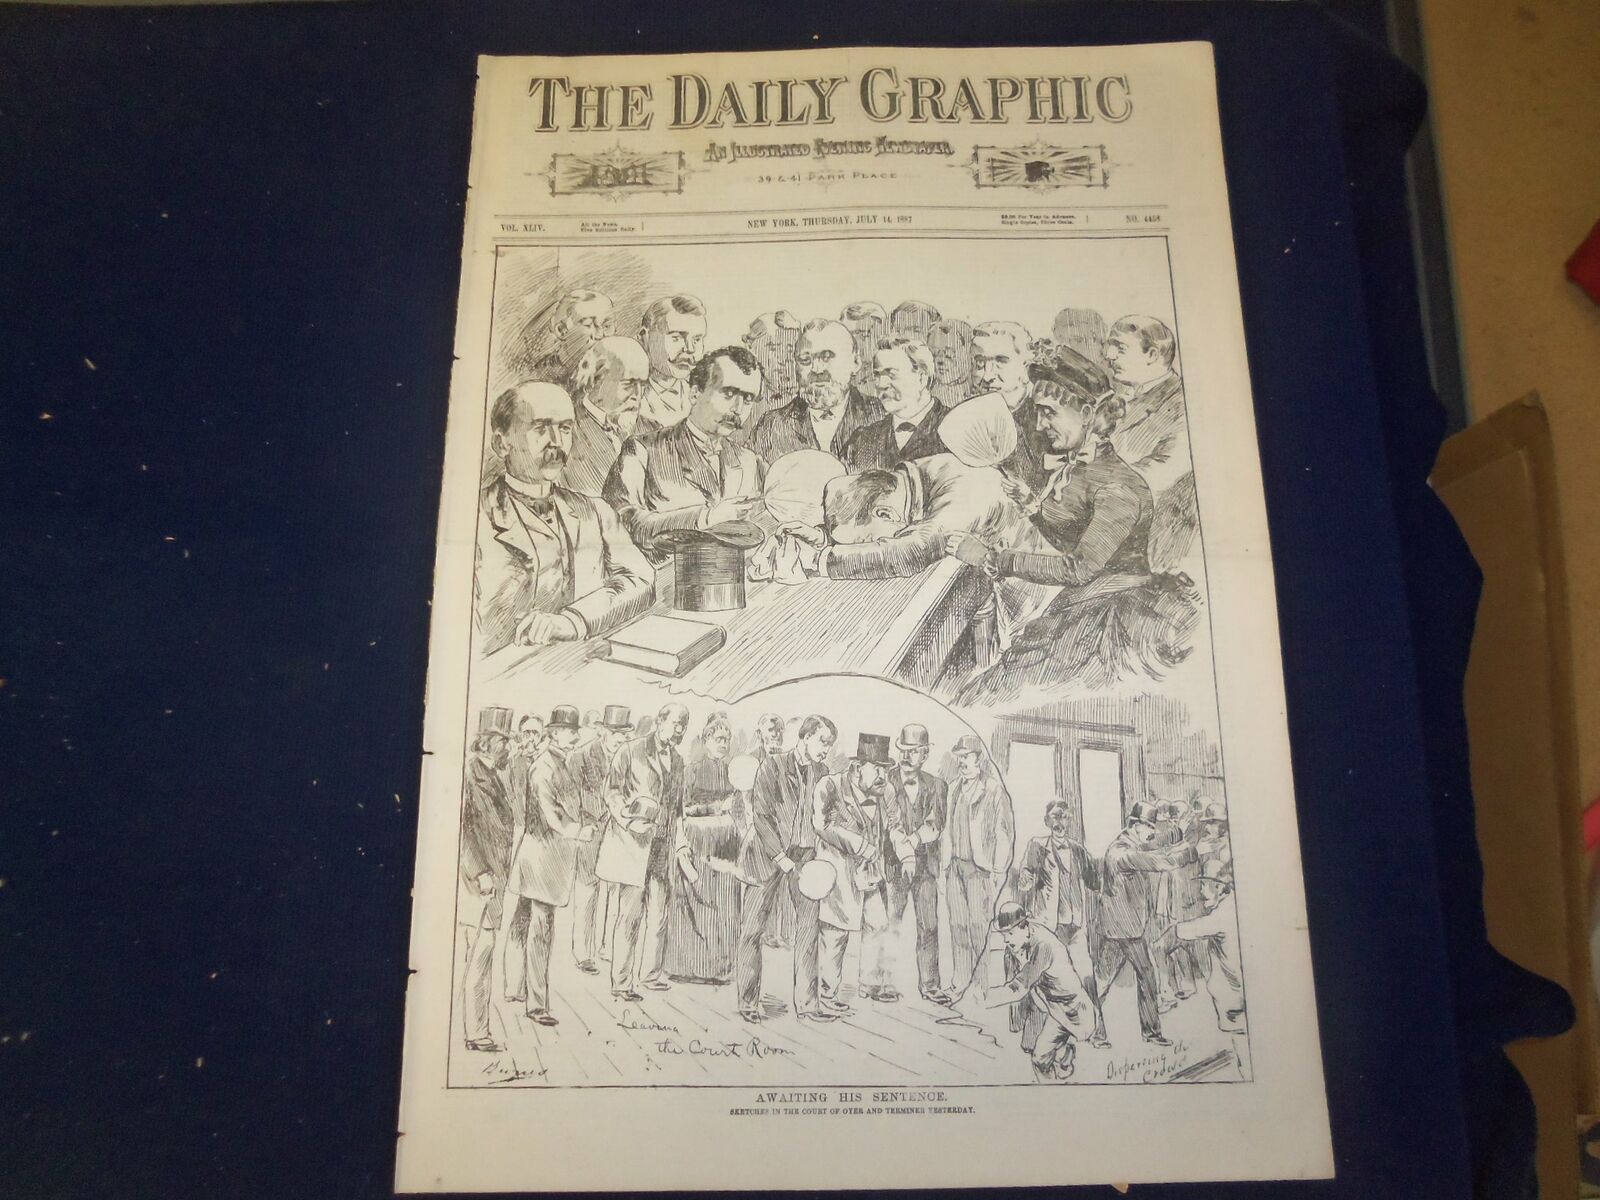 1887 JULY 14 THE DAILY GRAPHIC NEWSPAPER - AWAITING HIS SENTENCE - NT 7656